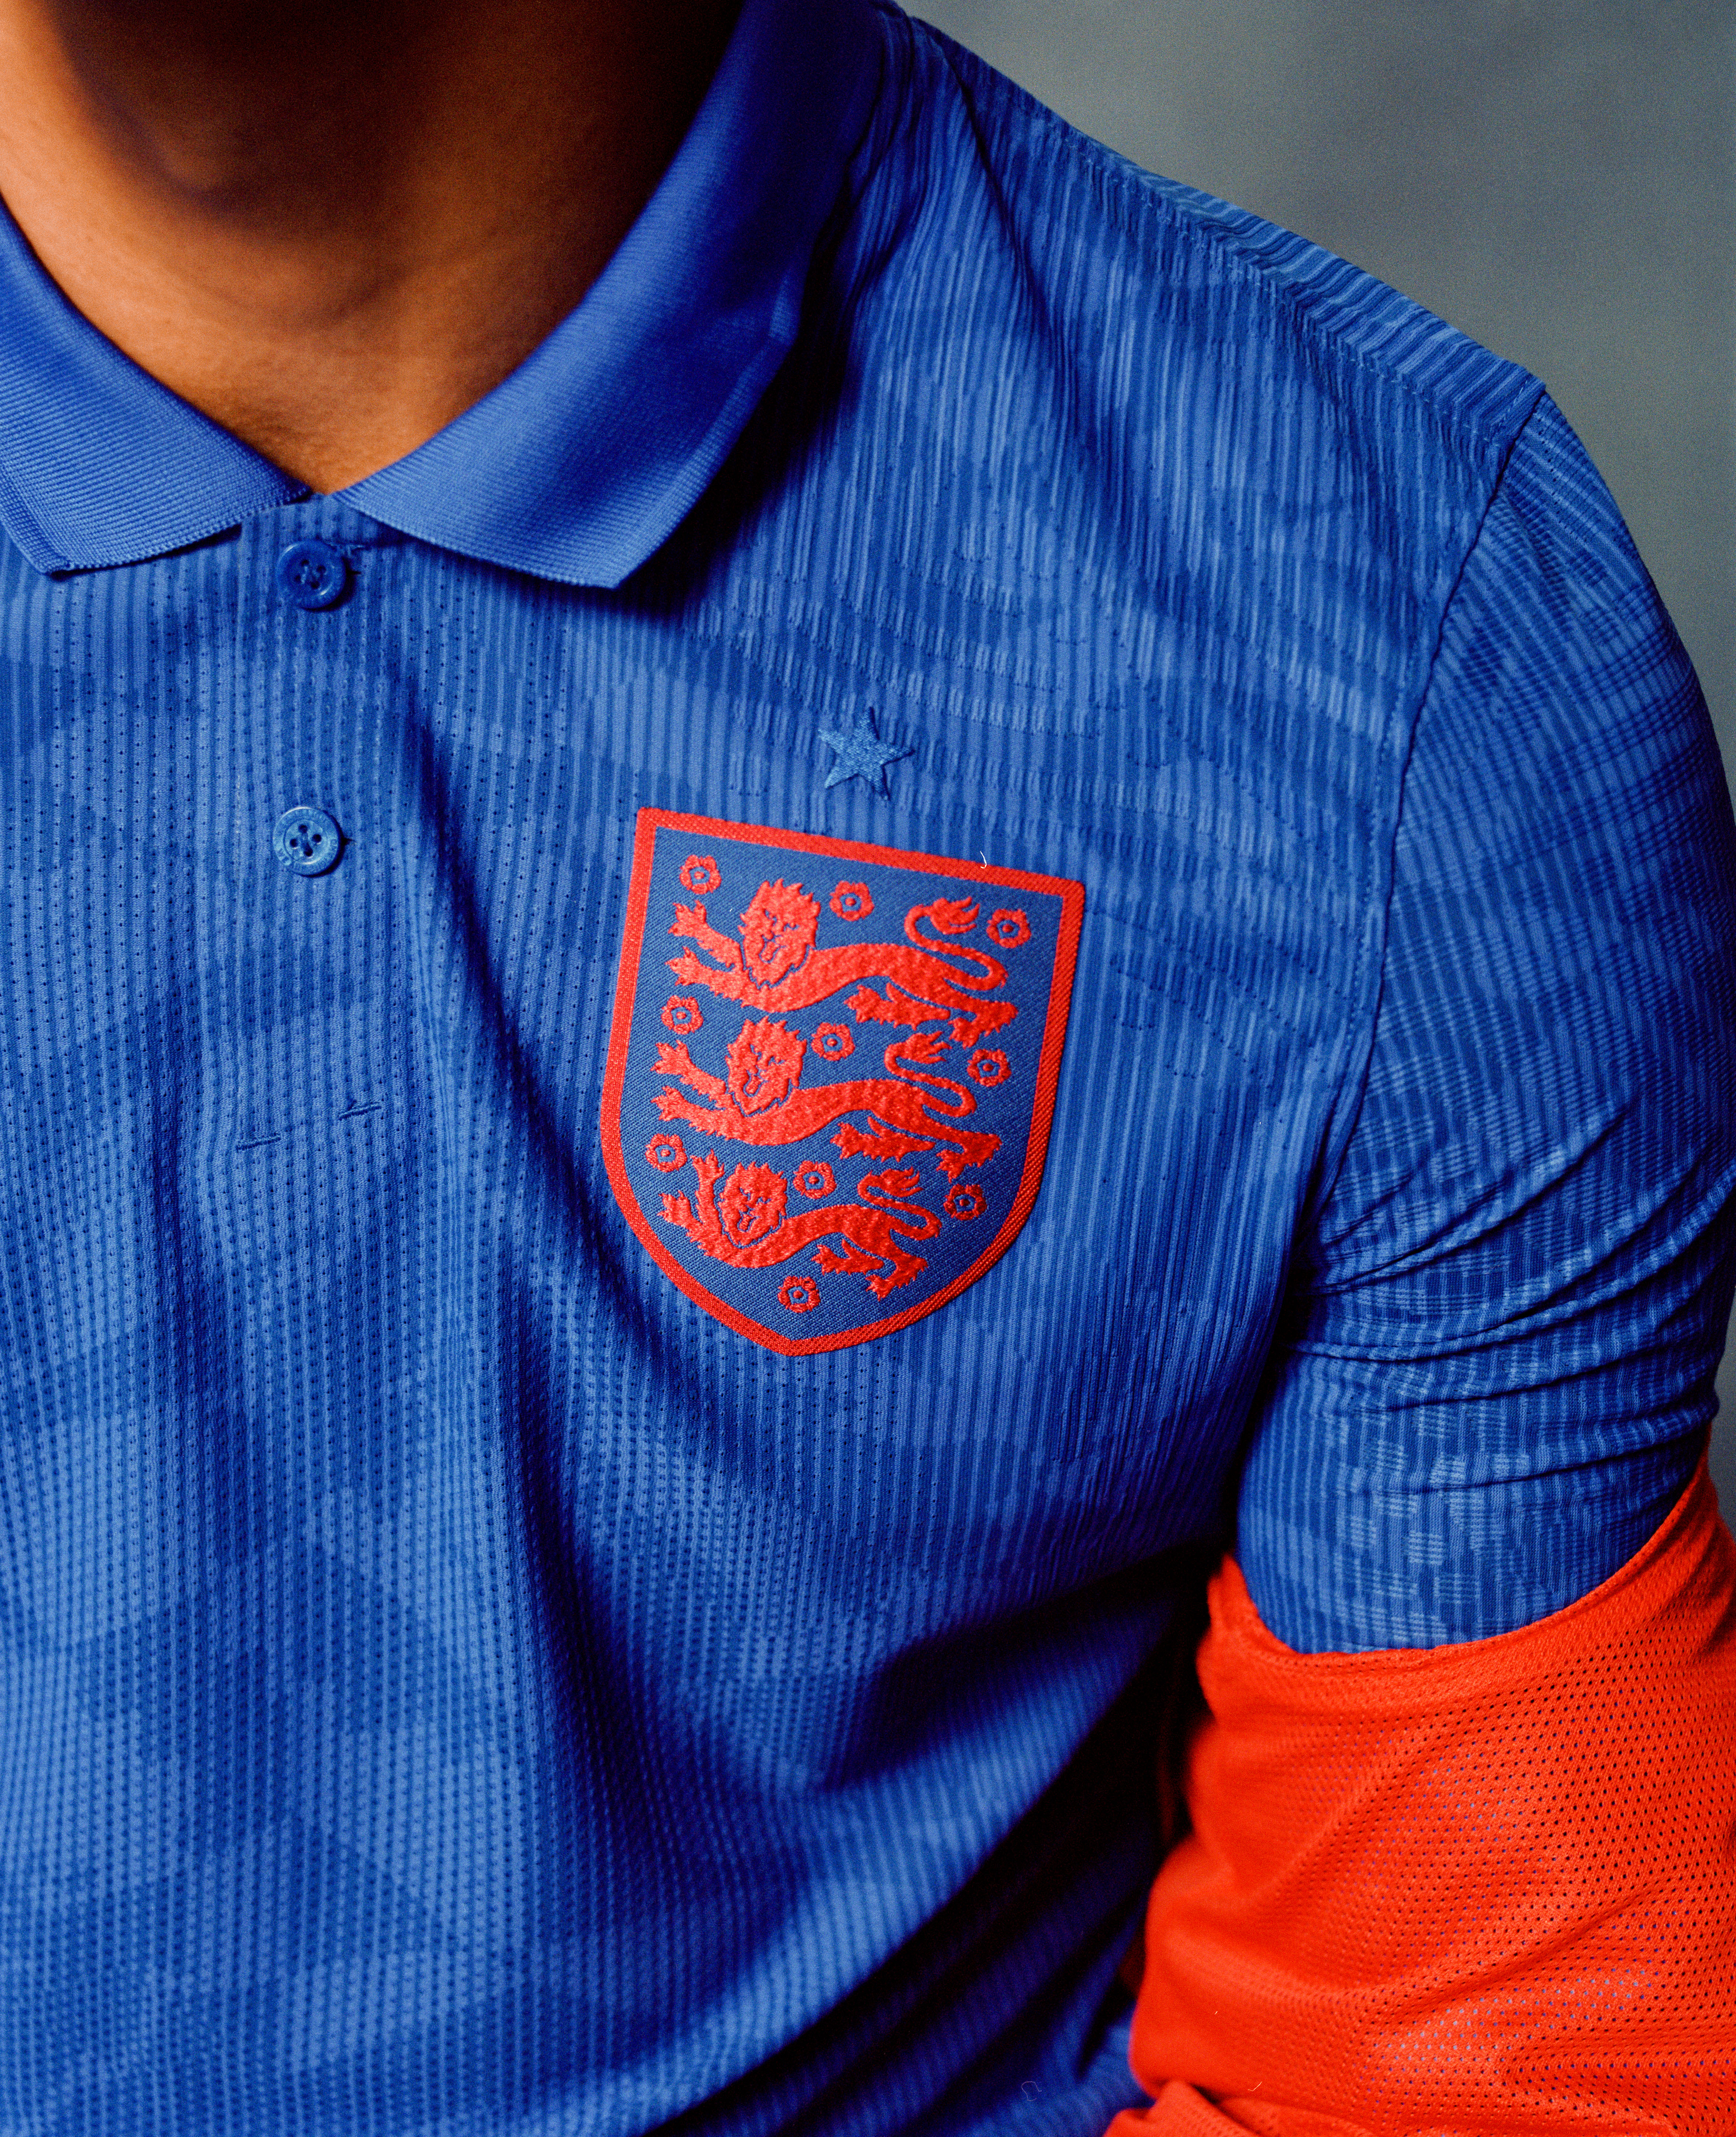 Nike unveil England's 2020 collection